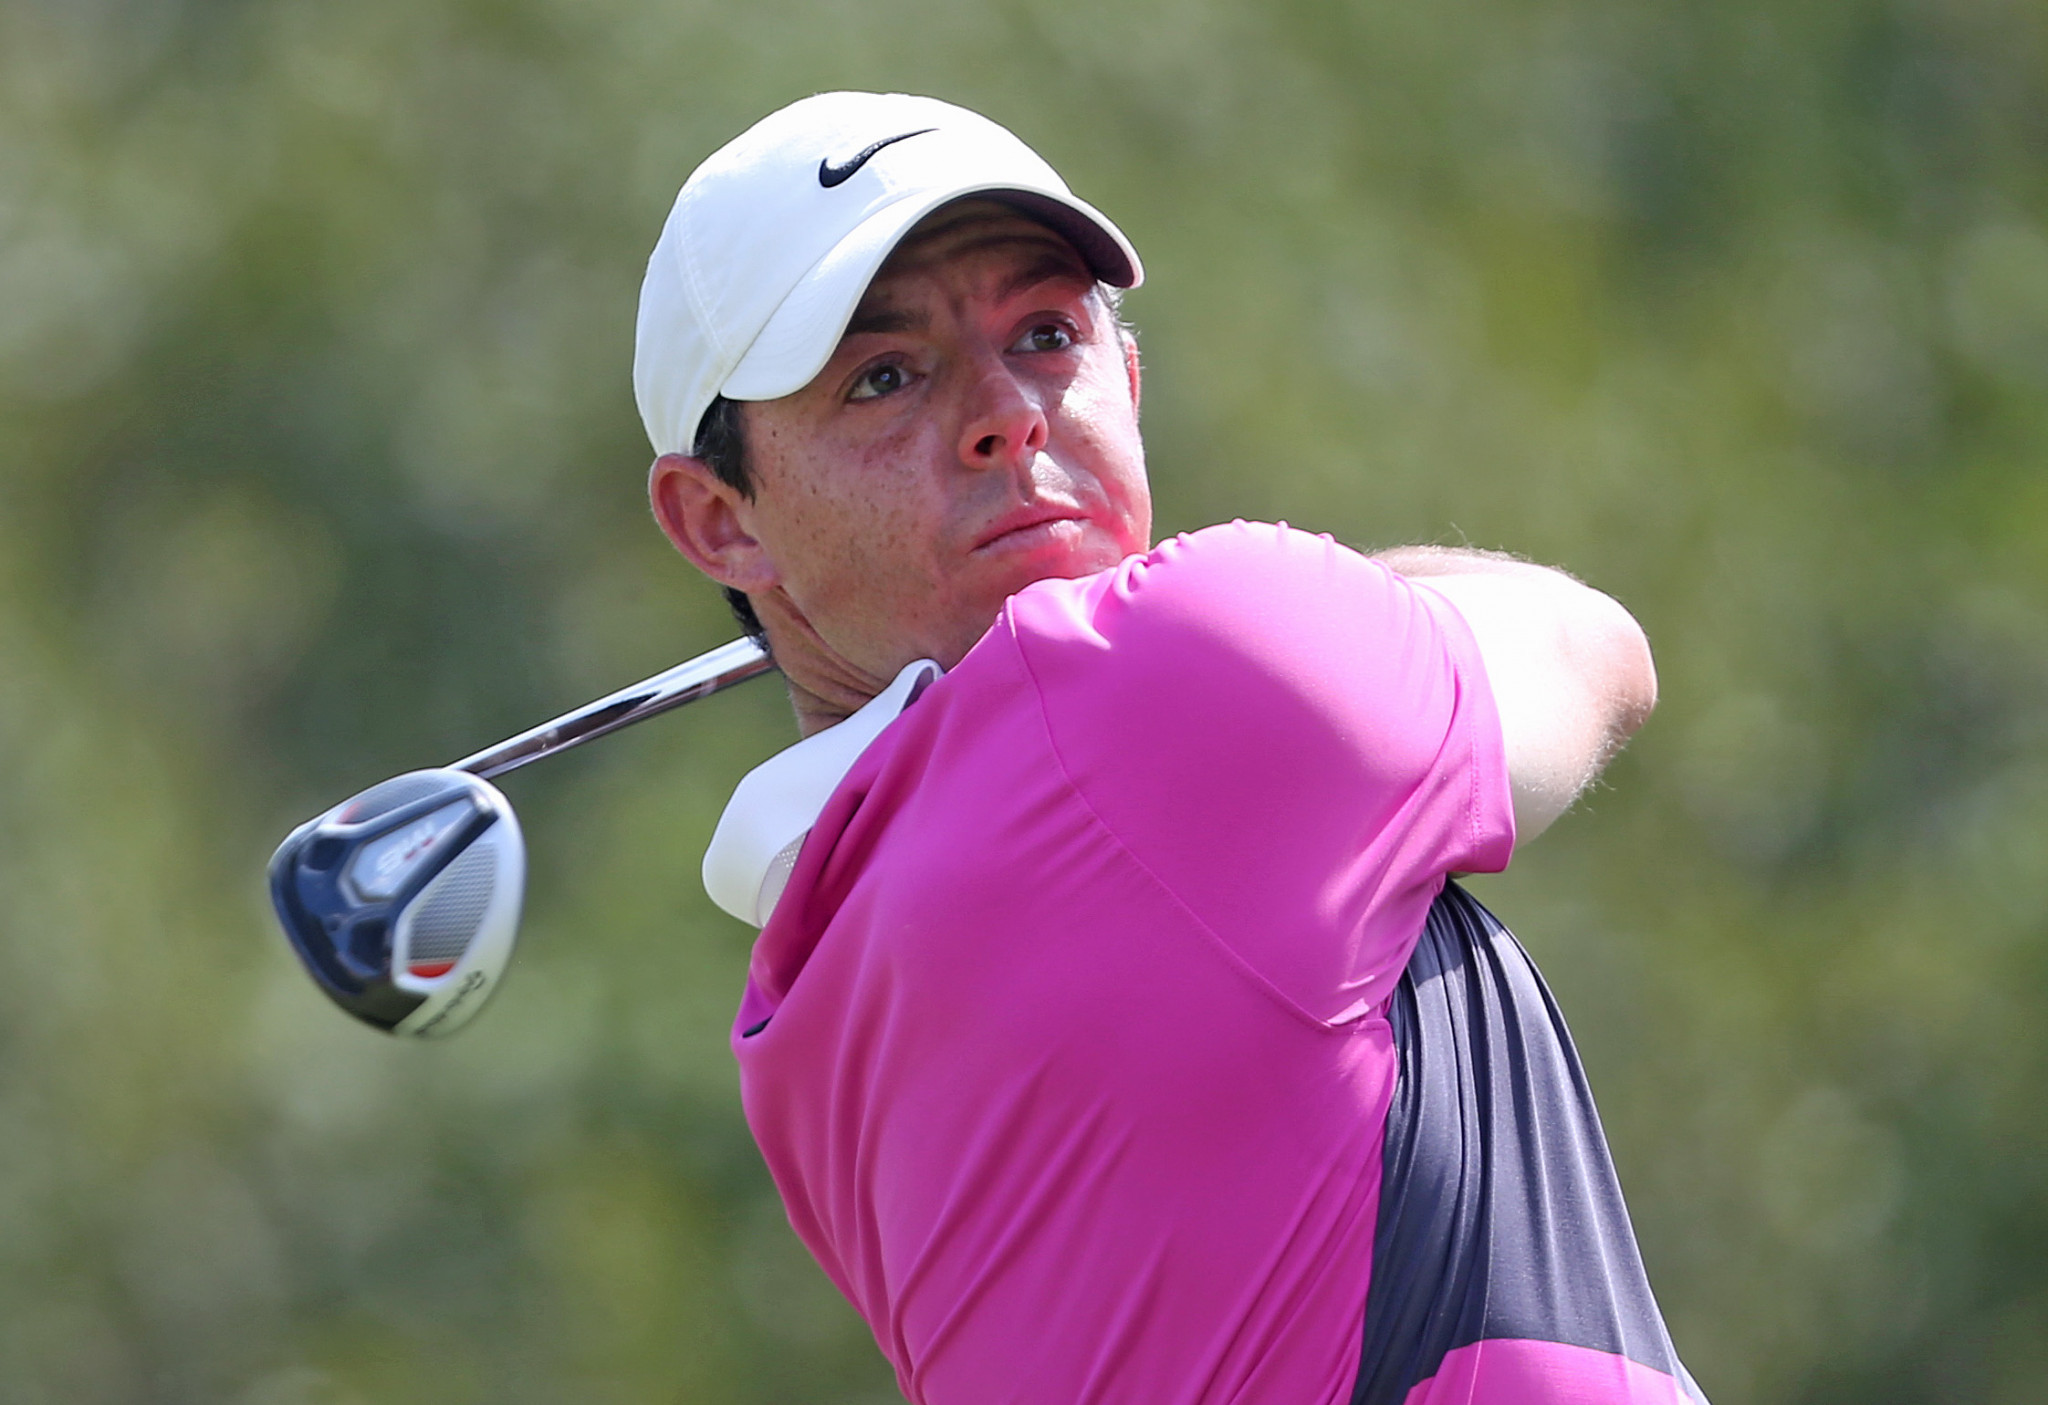 McIlroy rebounds from Open nightmare to lead WGC-FedEx St. Jude Invitational going into final round